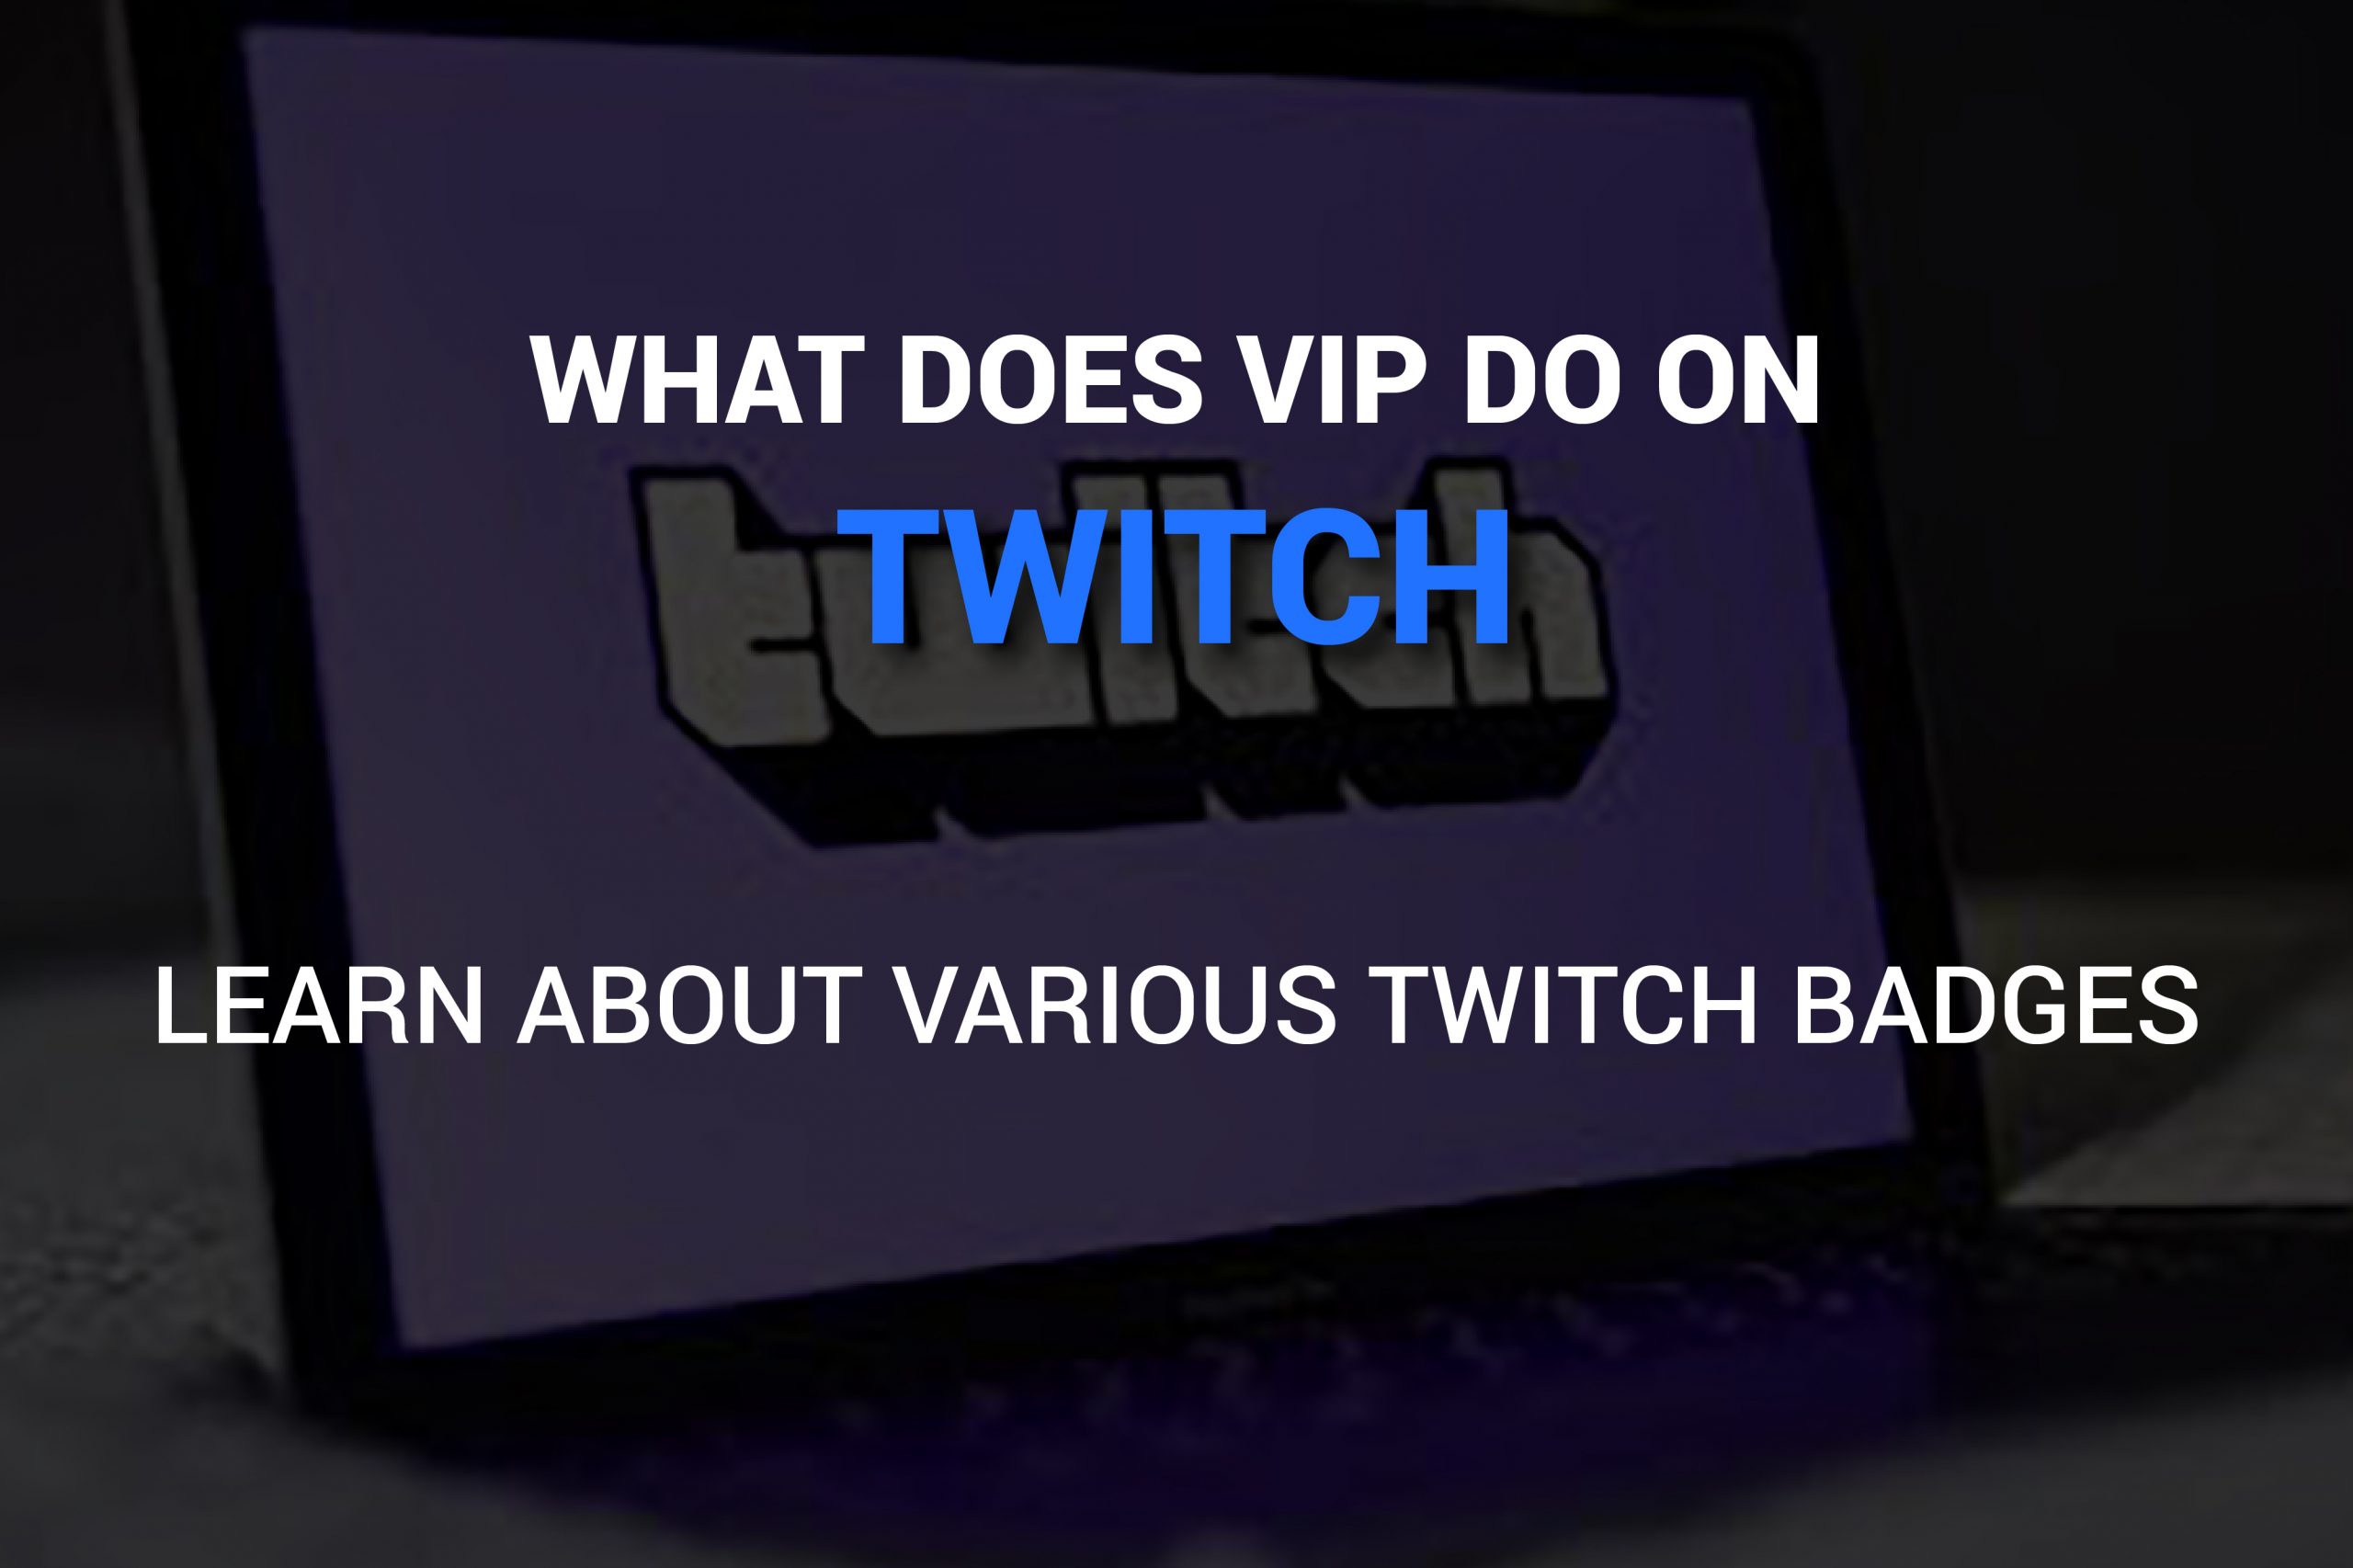 what does VIP do on twitch